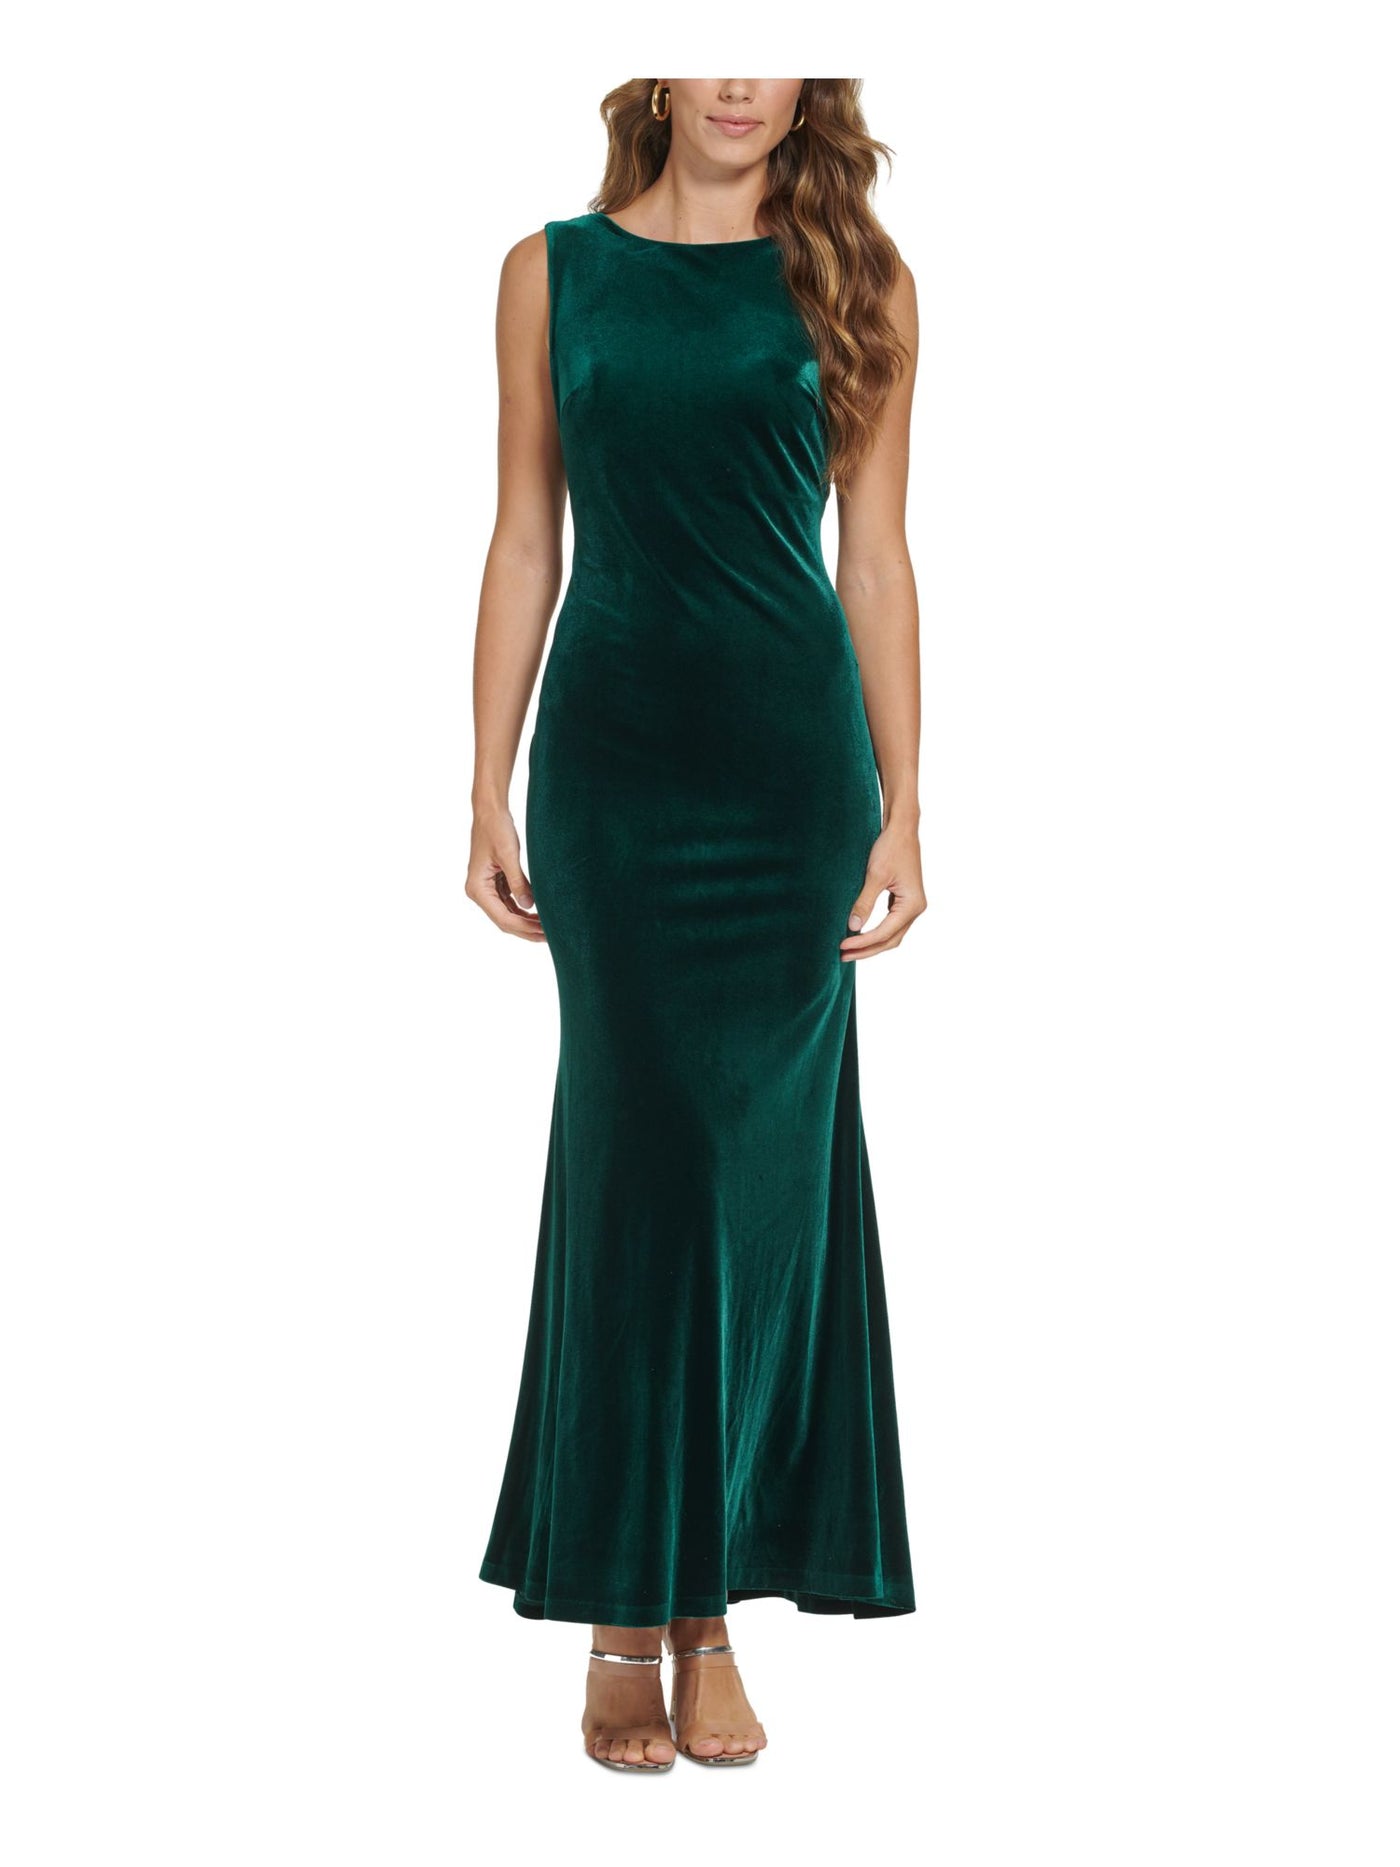 DKNY Womens Green Cowl Back Lined Bodice Darted Sleeveless Round Neck Full-Length Evening Gown Dress 10